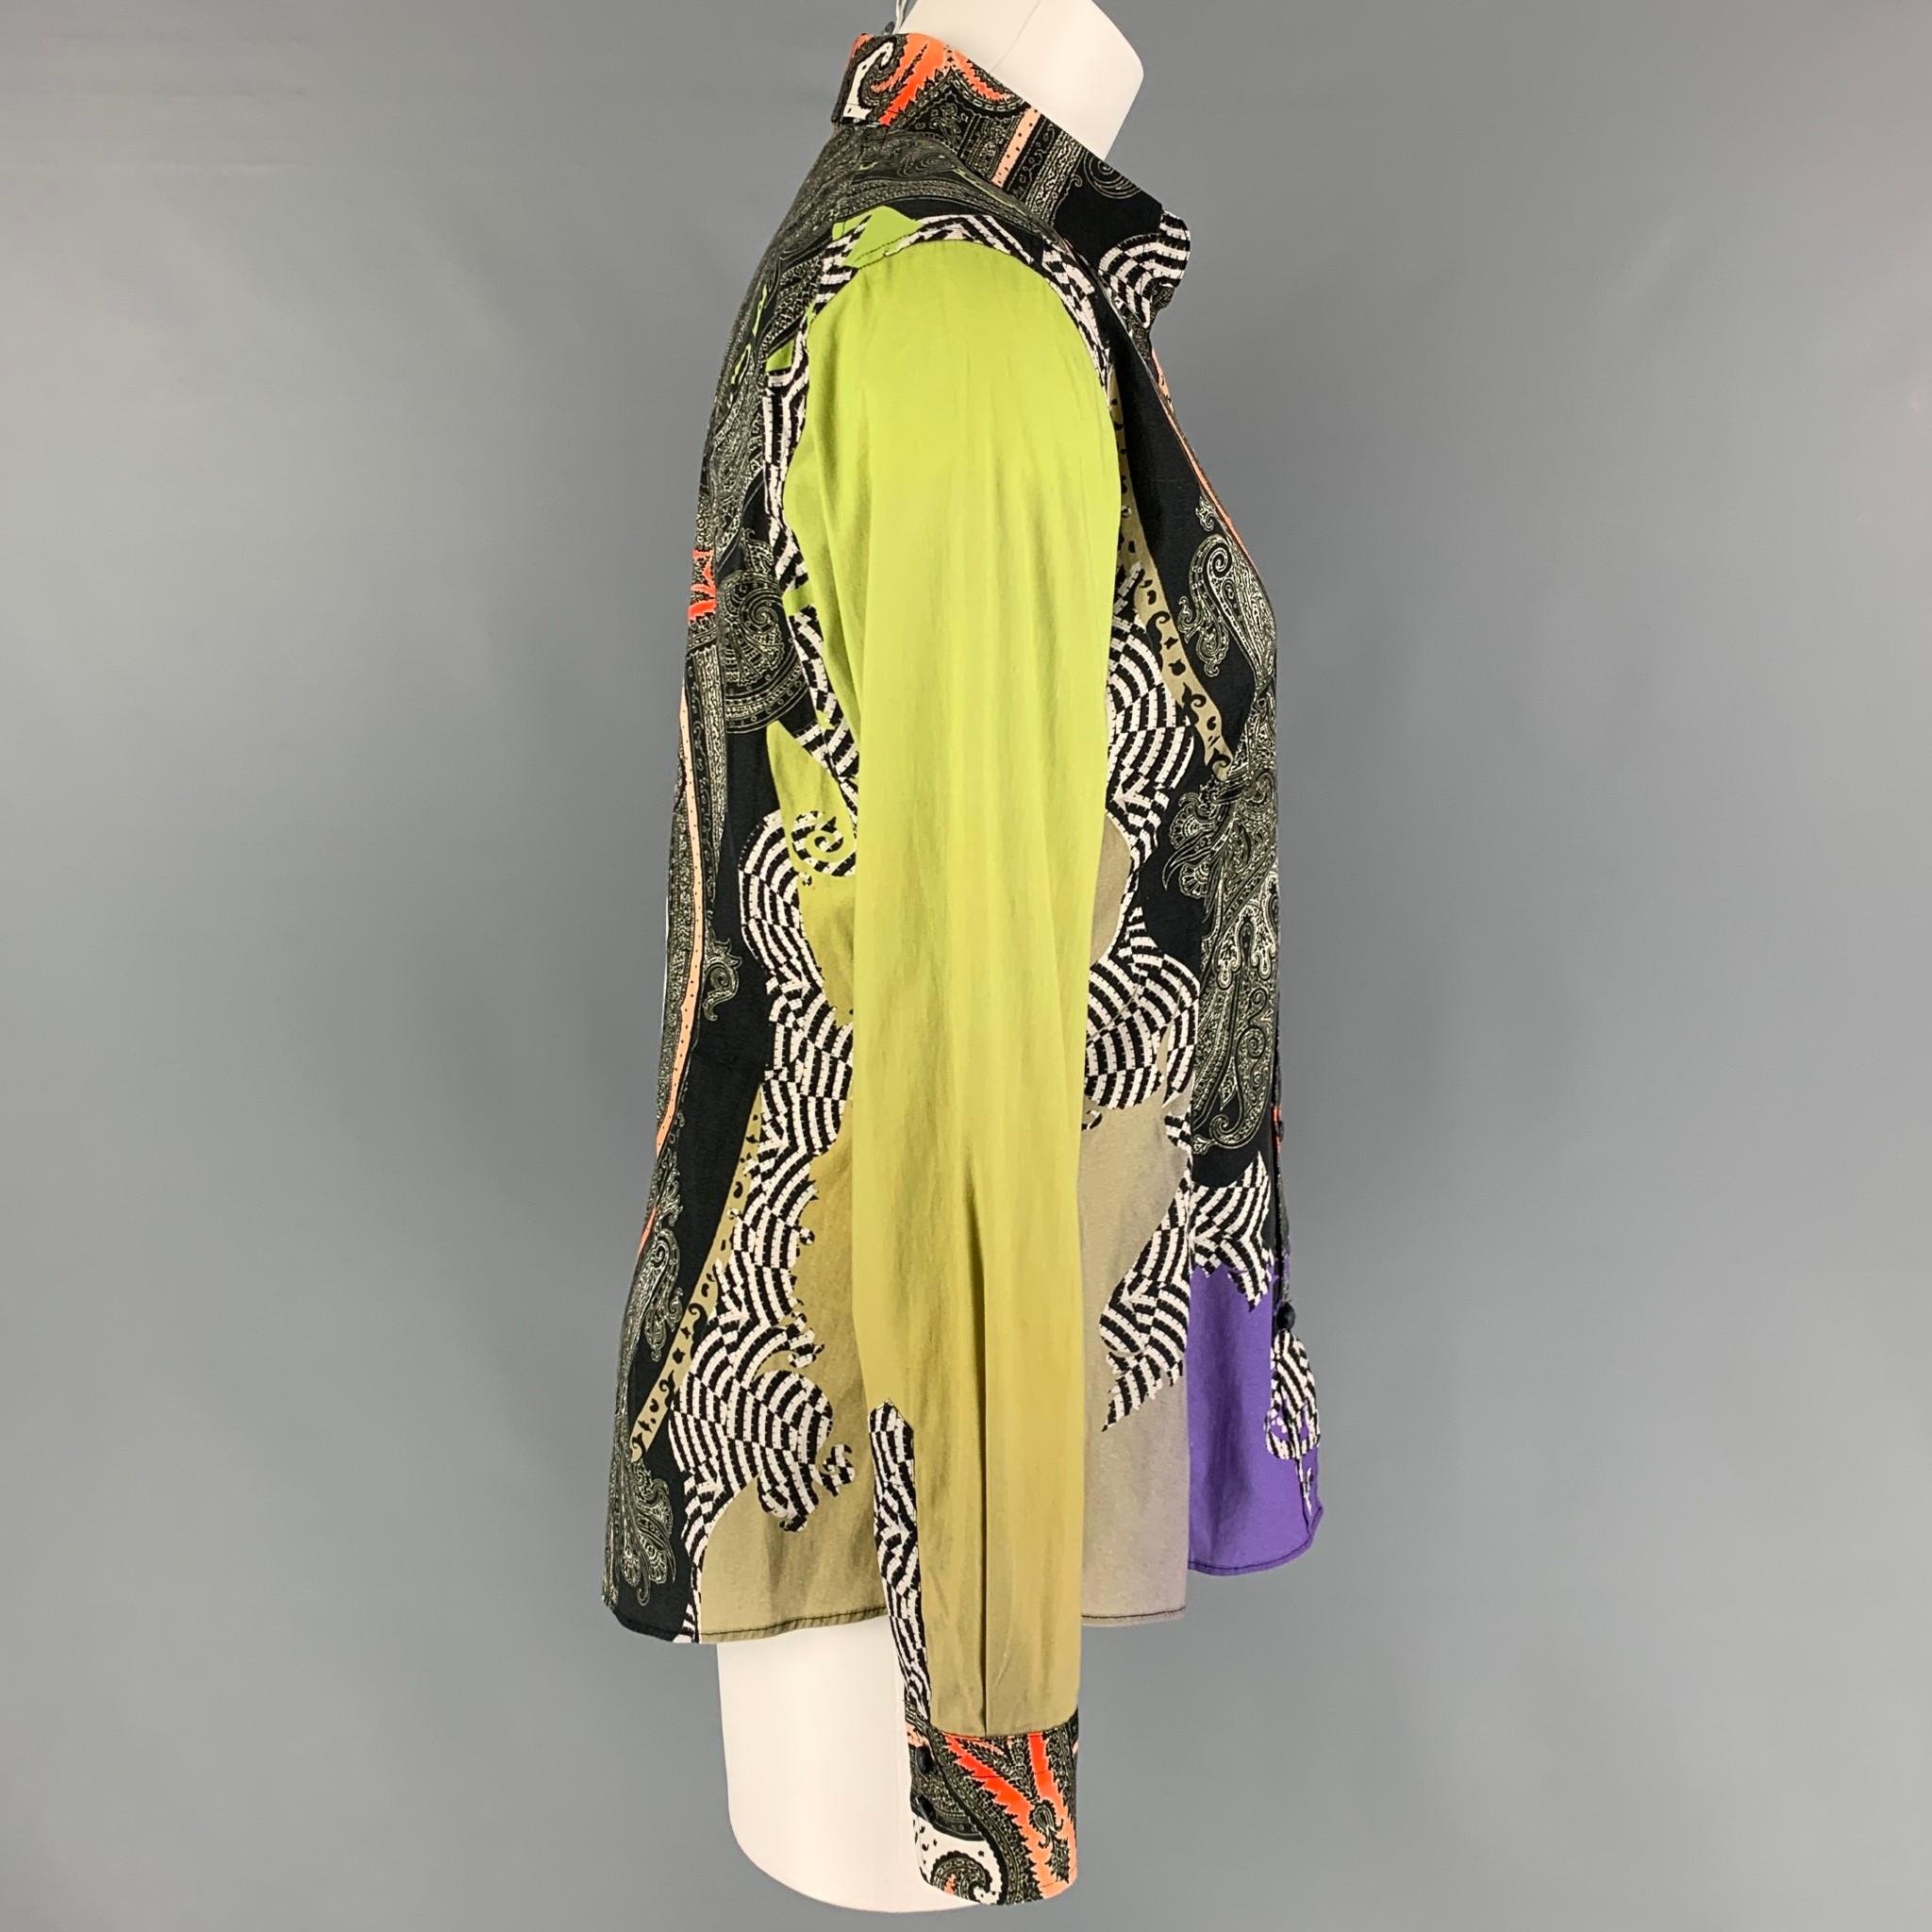 ETRO blouse comes in a multi-color paisley material featuring a spread collar and a button up closure. Made in Italy. 

Very Good Pre-Owned Condition.
Marked: 44

Measurements:

Shoulder: 15.5 in.
Bust: 36 in.
Sleeve: 24.5 in.
Length: 26 in. 